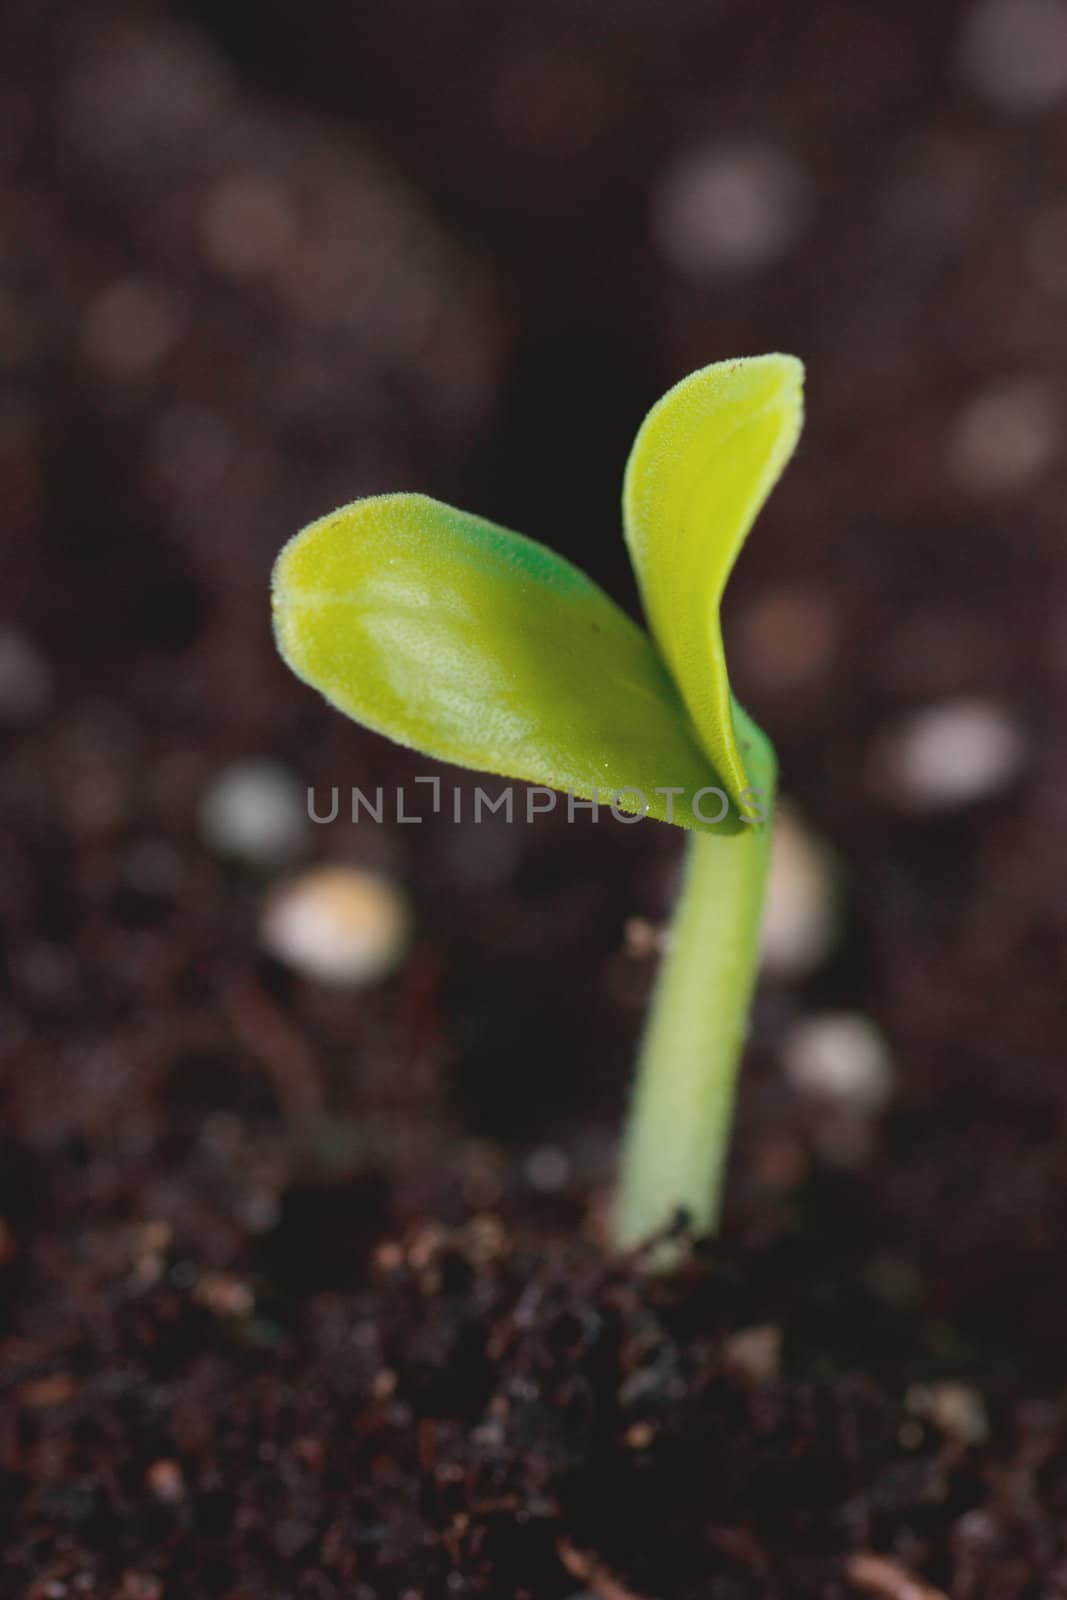 Smal green plant begins to shoot